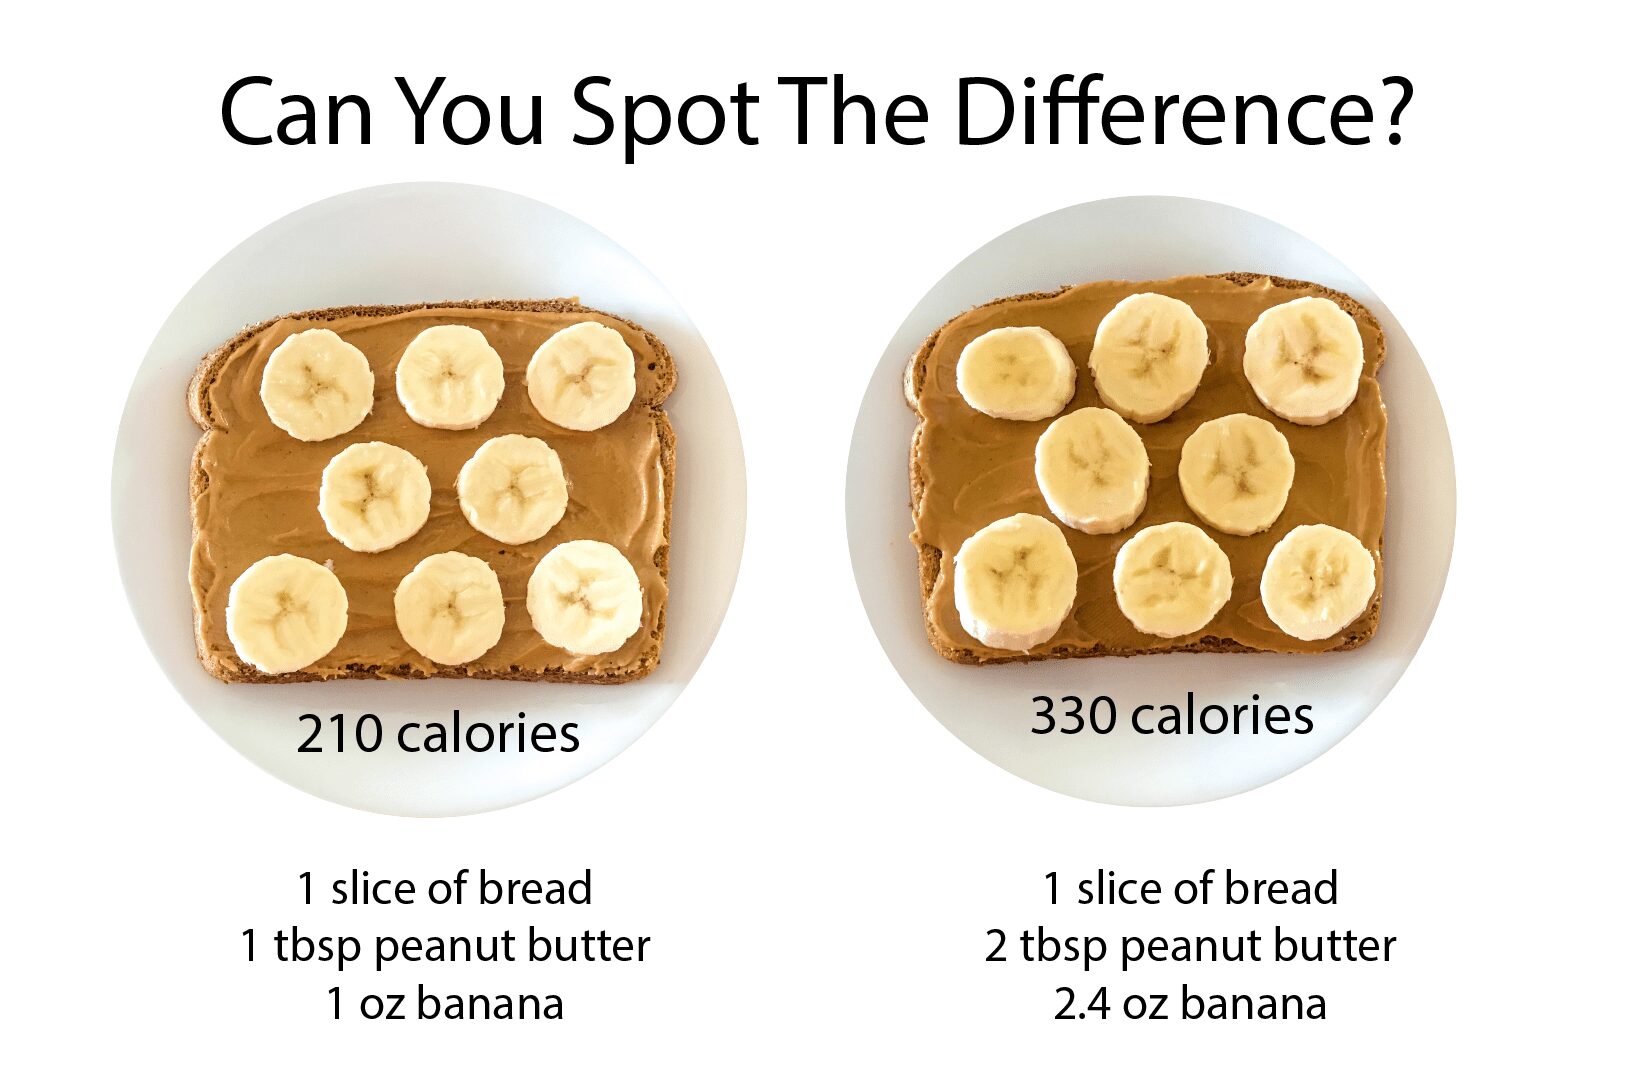 Do You Suffer From Portion Distortion?